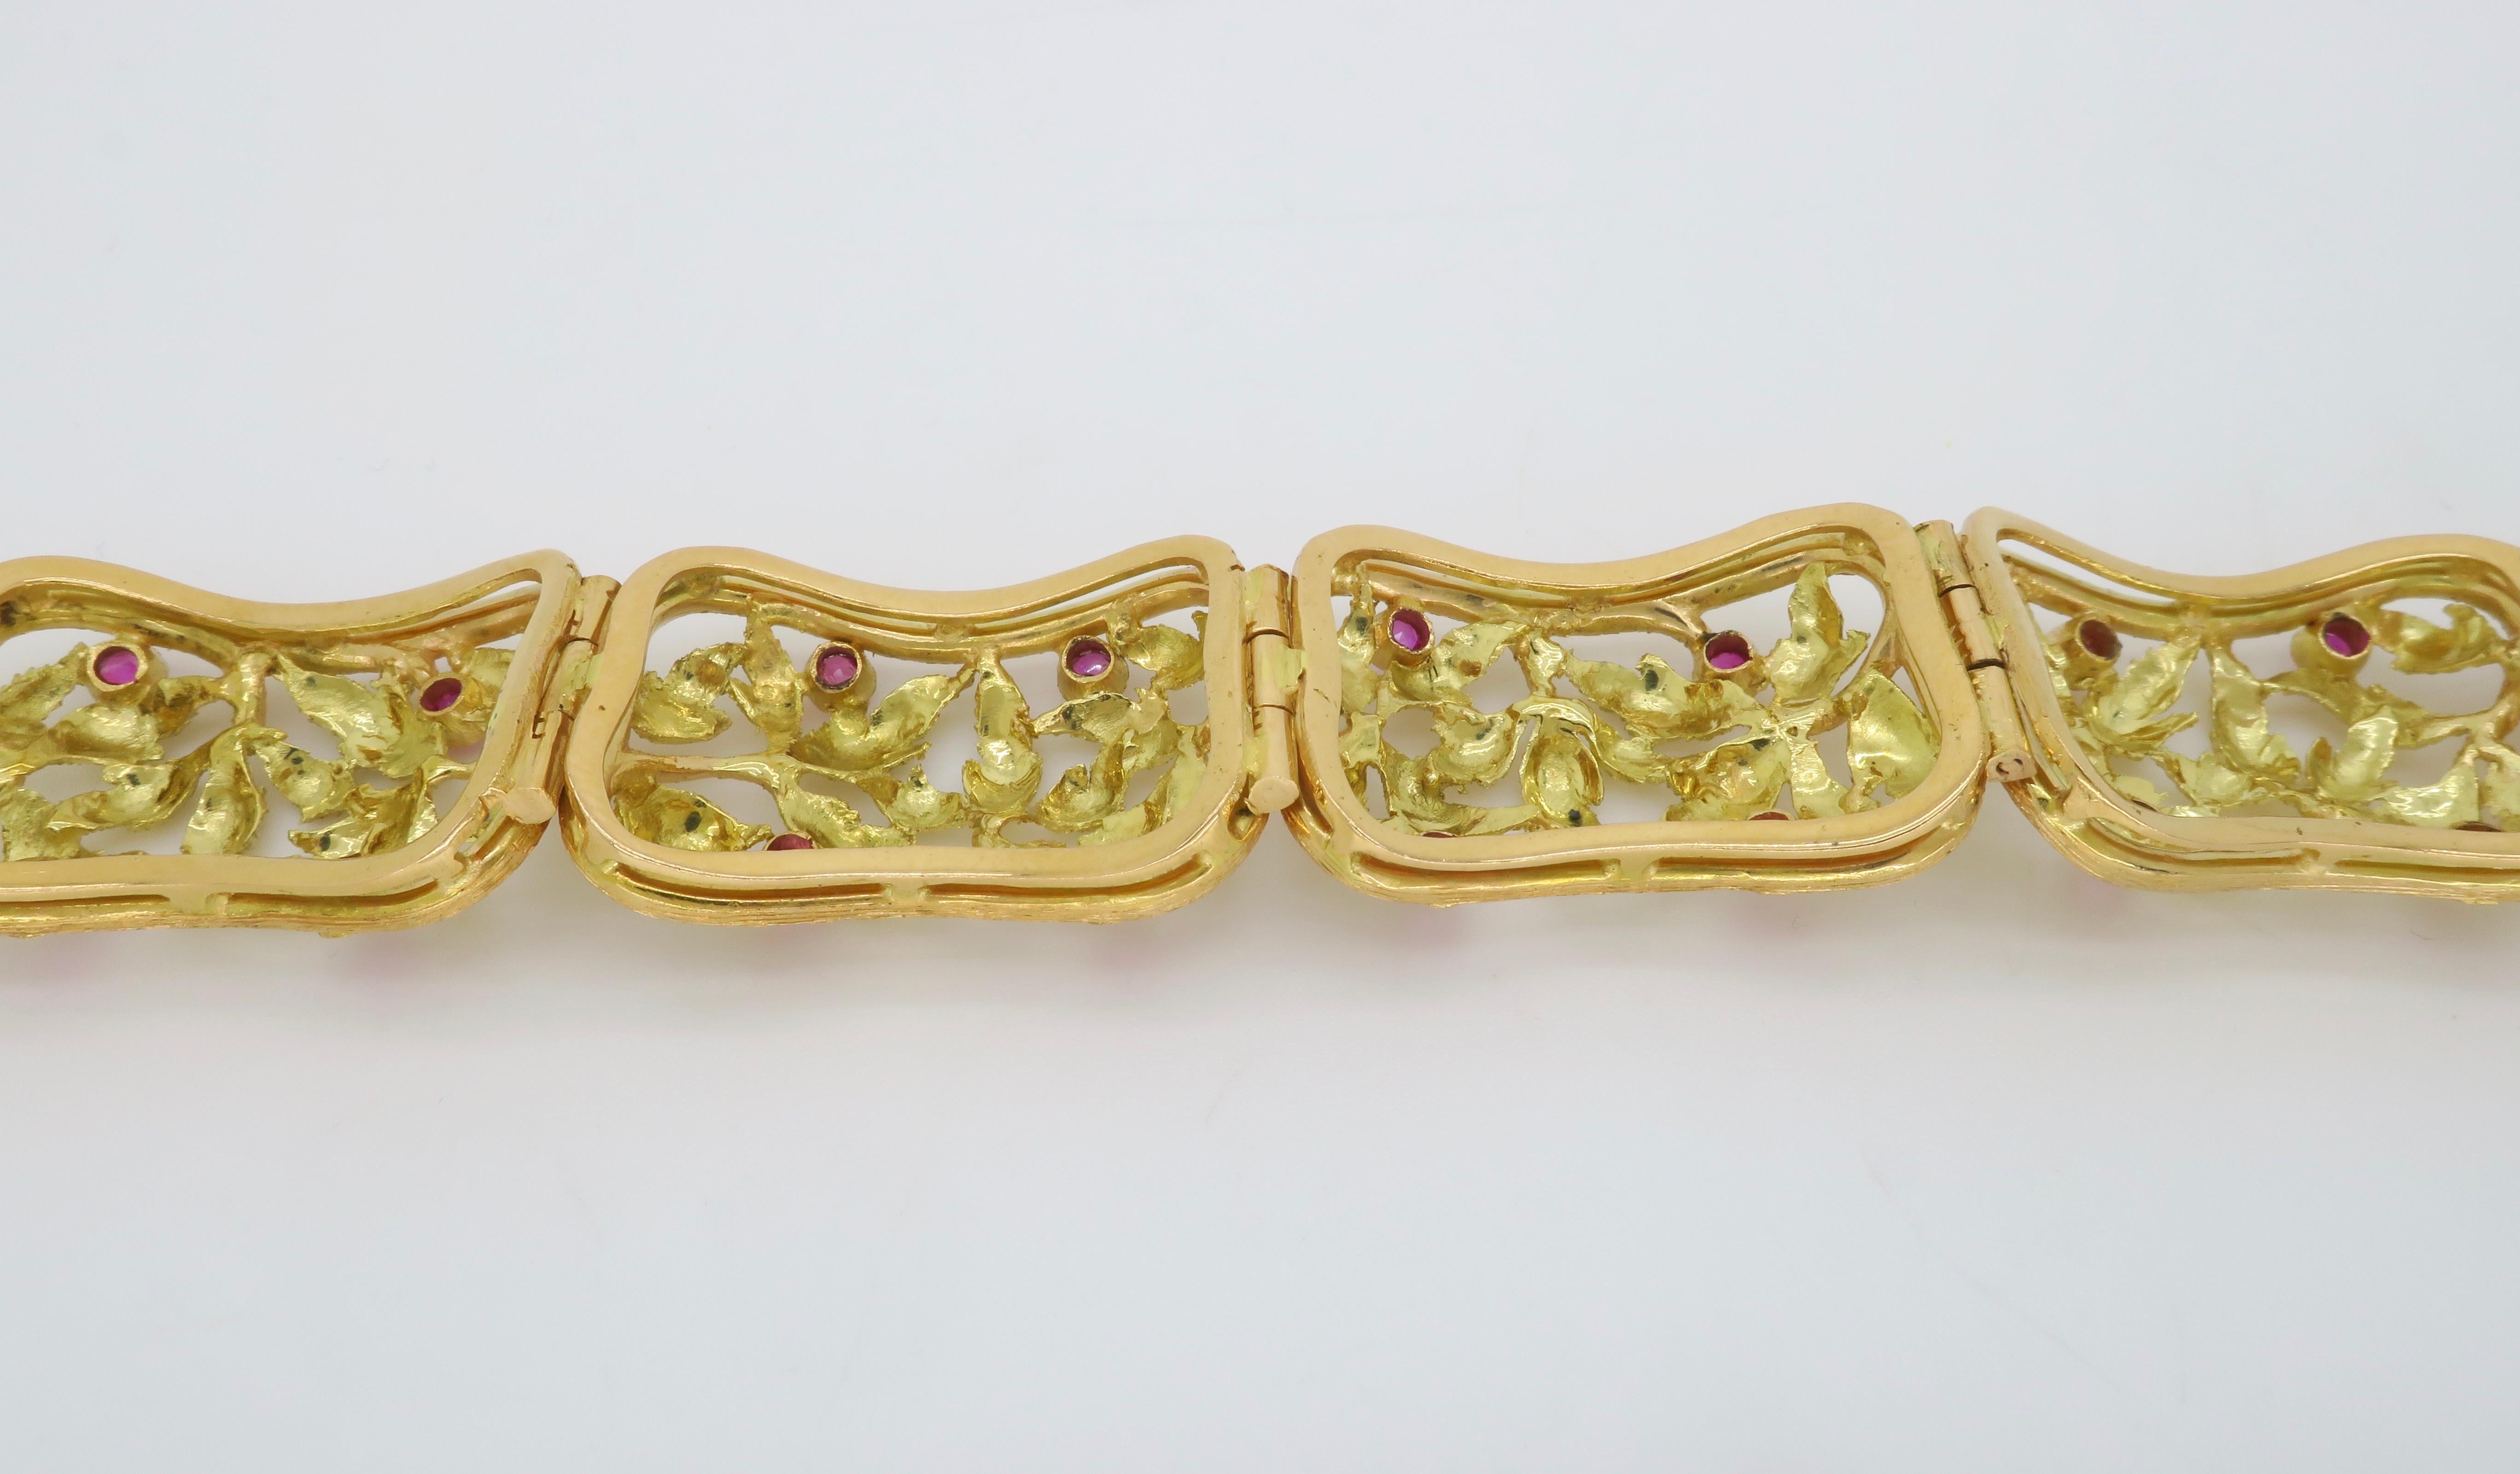 Impressive Yellow & Green Gold Bracelet Crafted with Rubies 1